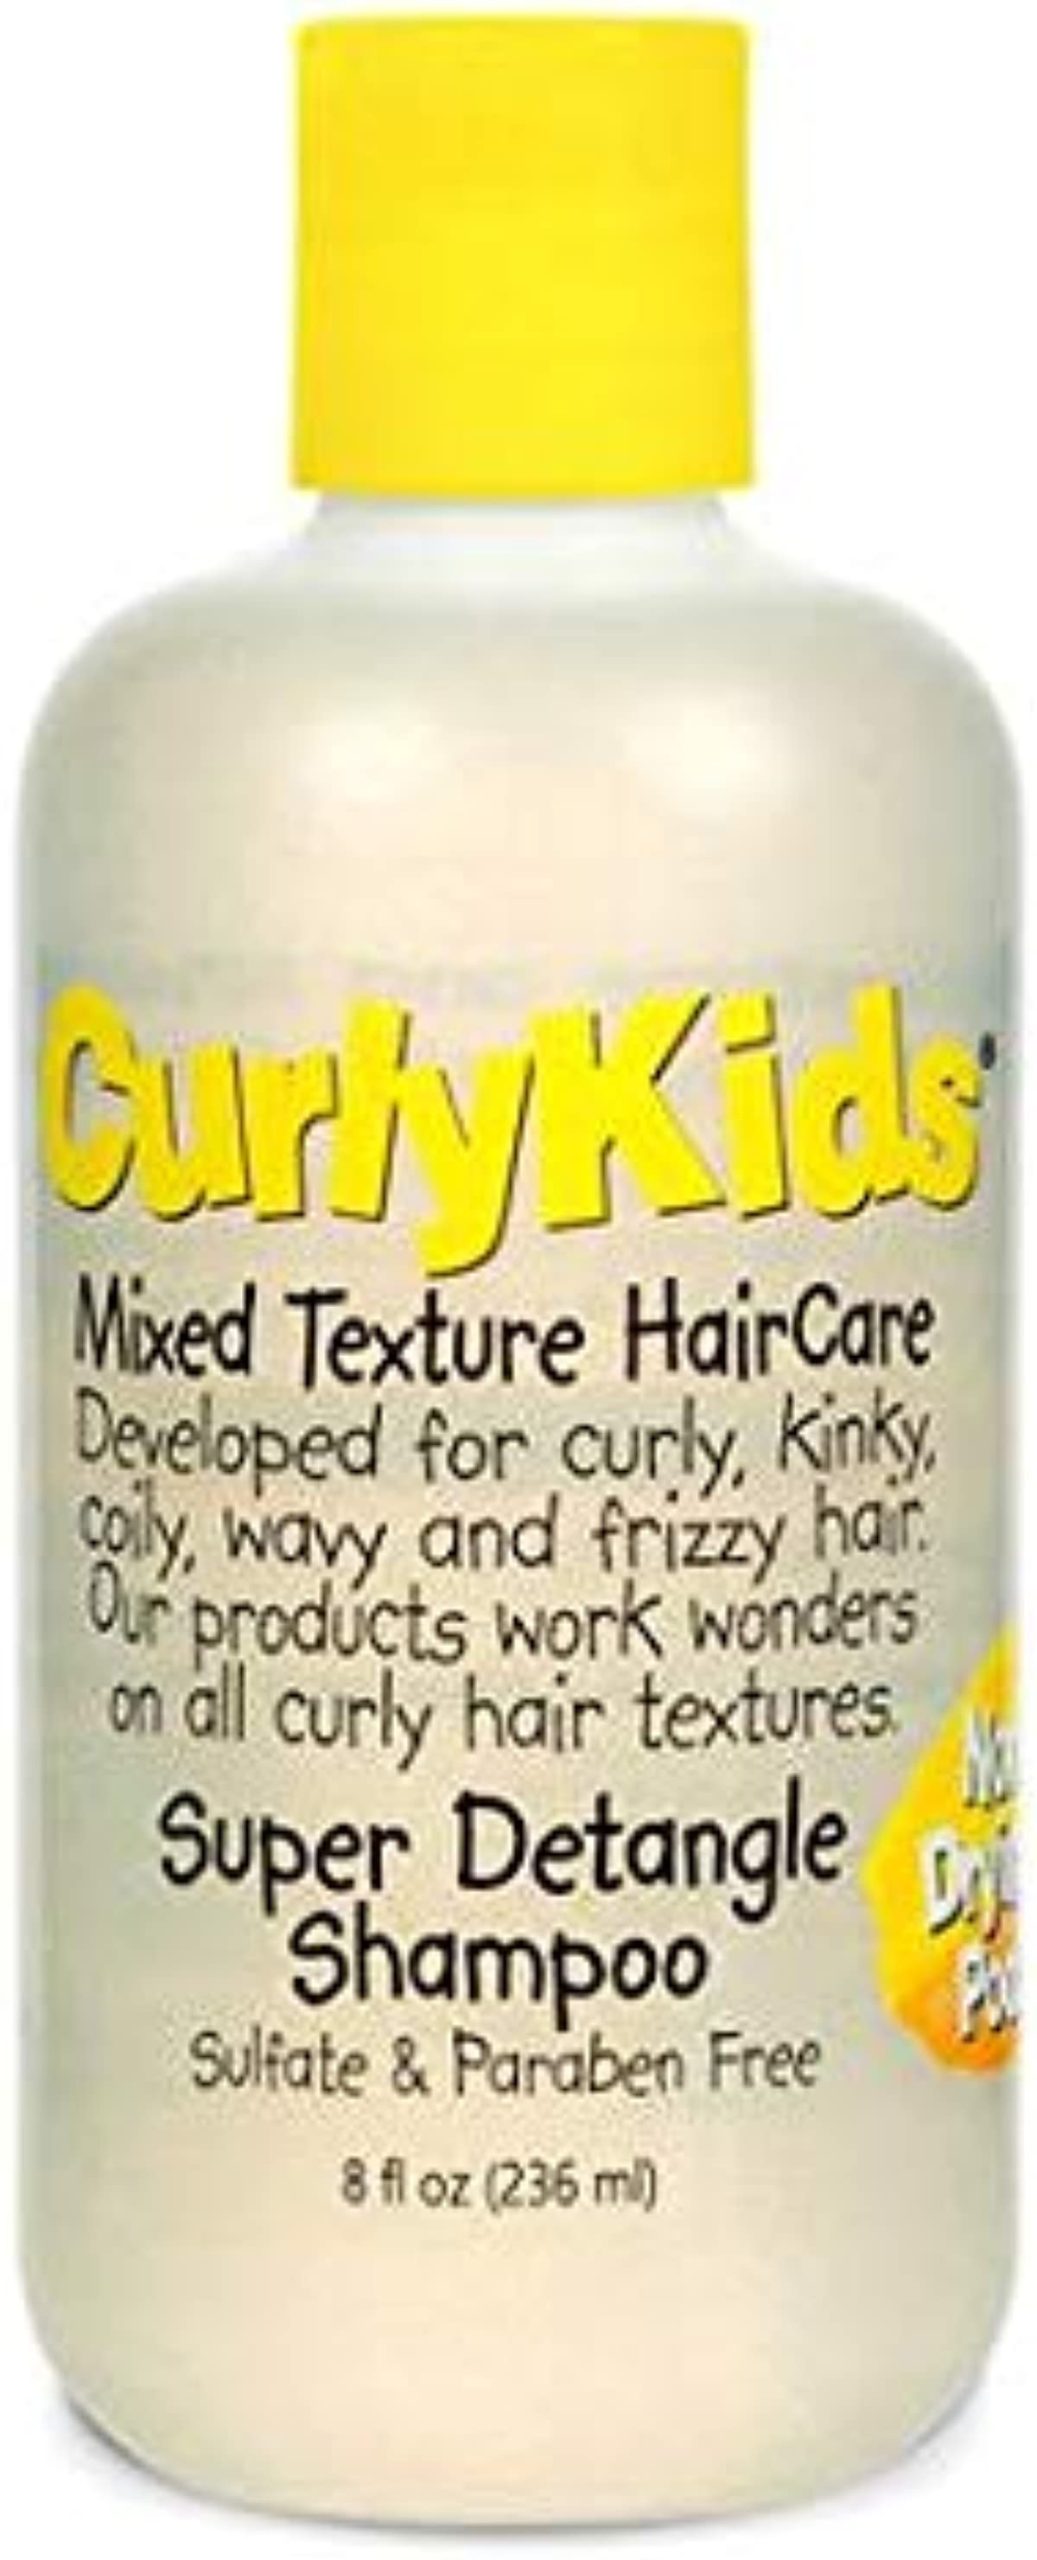 CurlyKids Mixed Hair HairCare Set Super Detangling Shampoo 8.0 Ounce, Conditioner 8.0 Ounce, Spray 6.0 Ounce, Curly Crème Conditioner 6.0 Ounce - 4-Pack